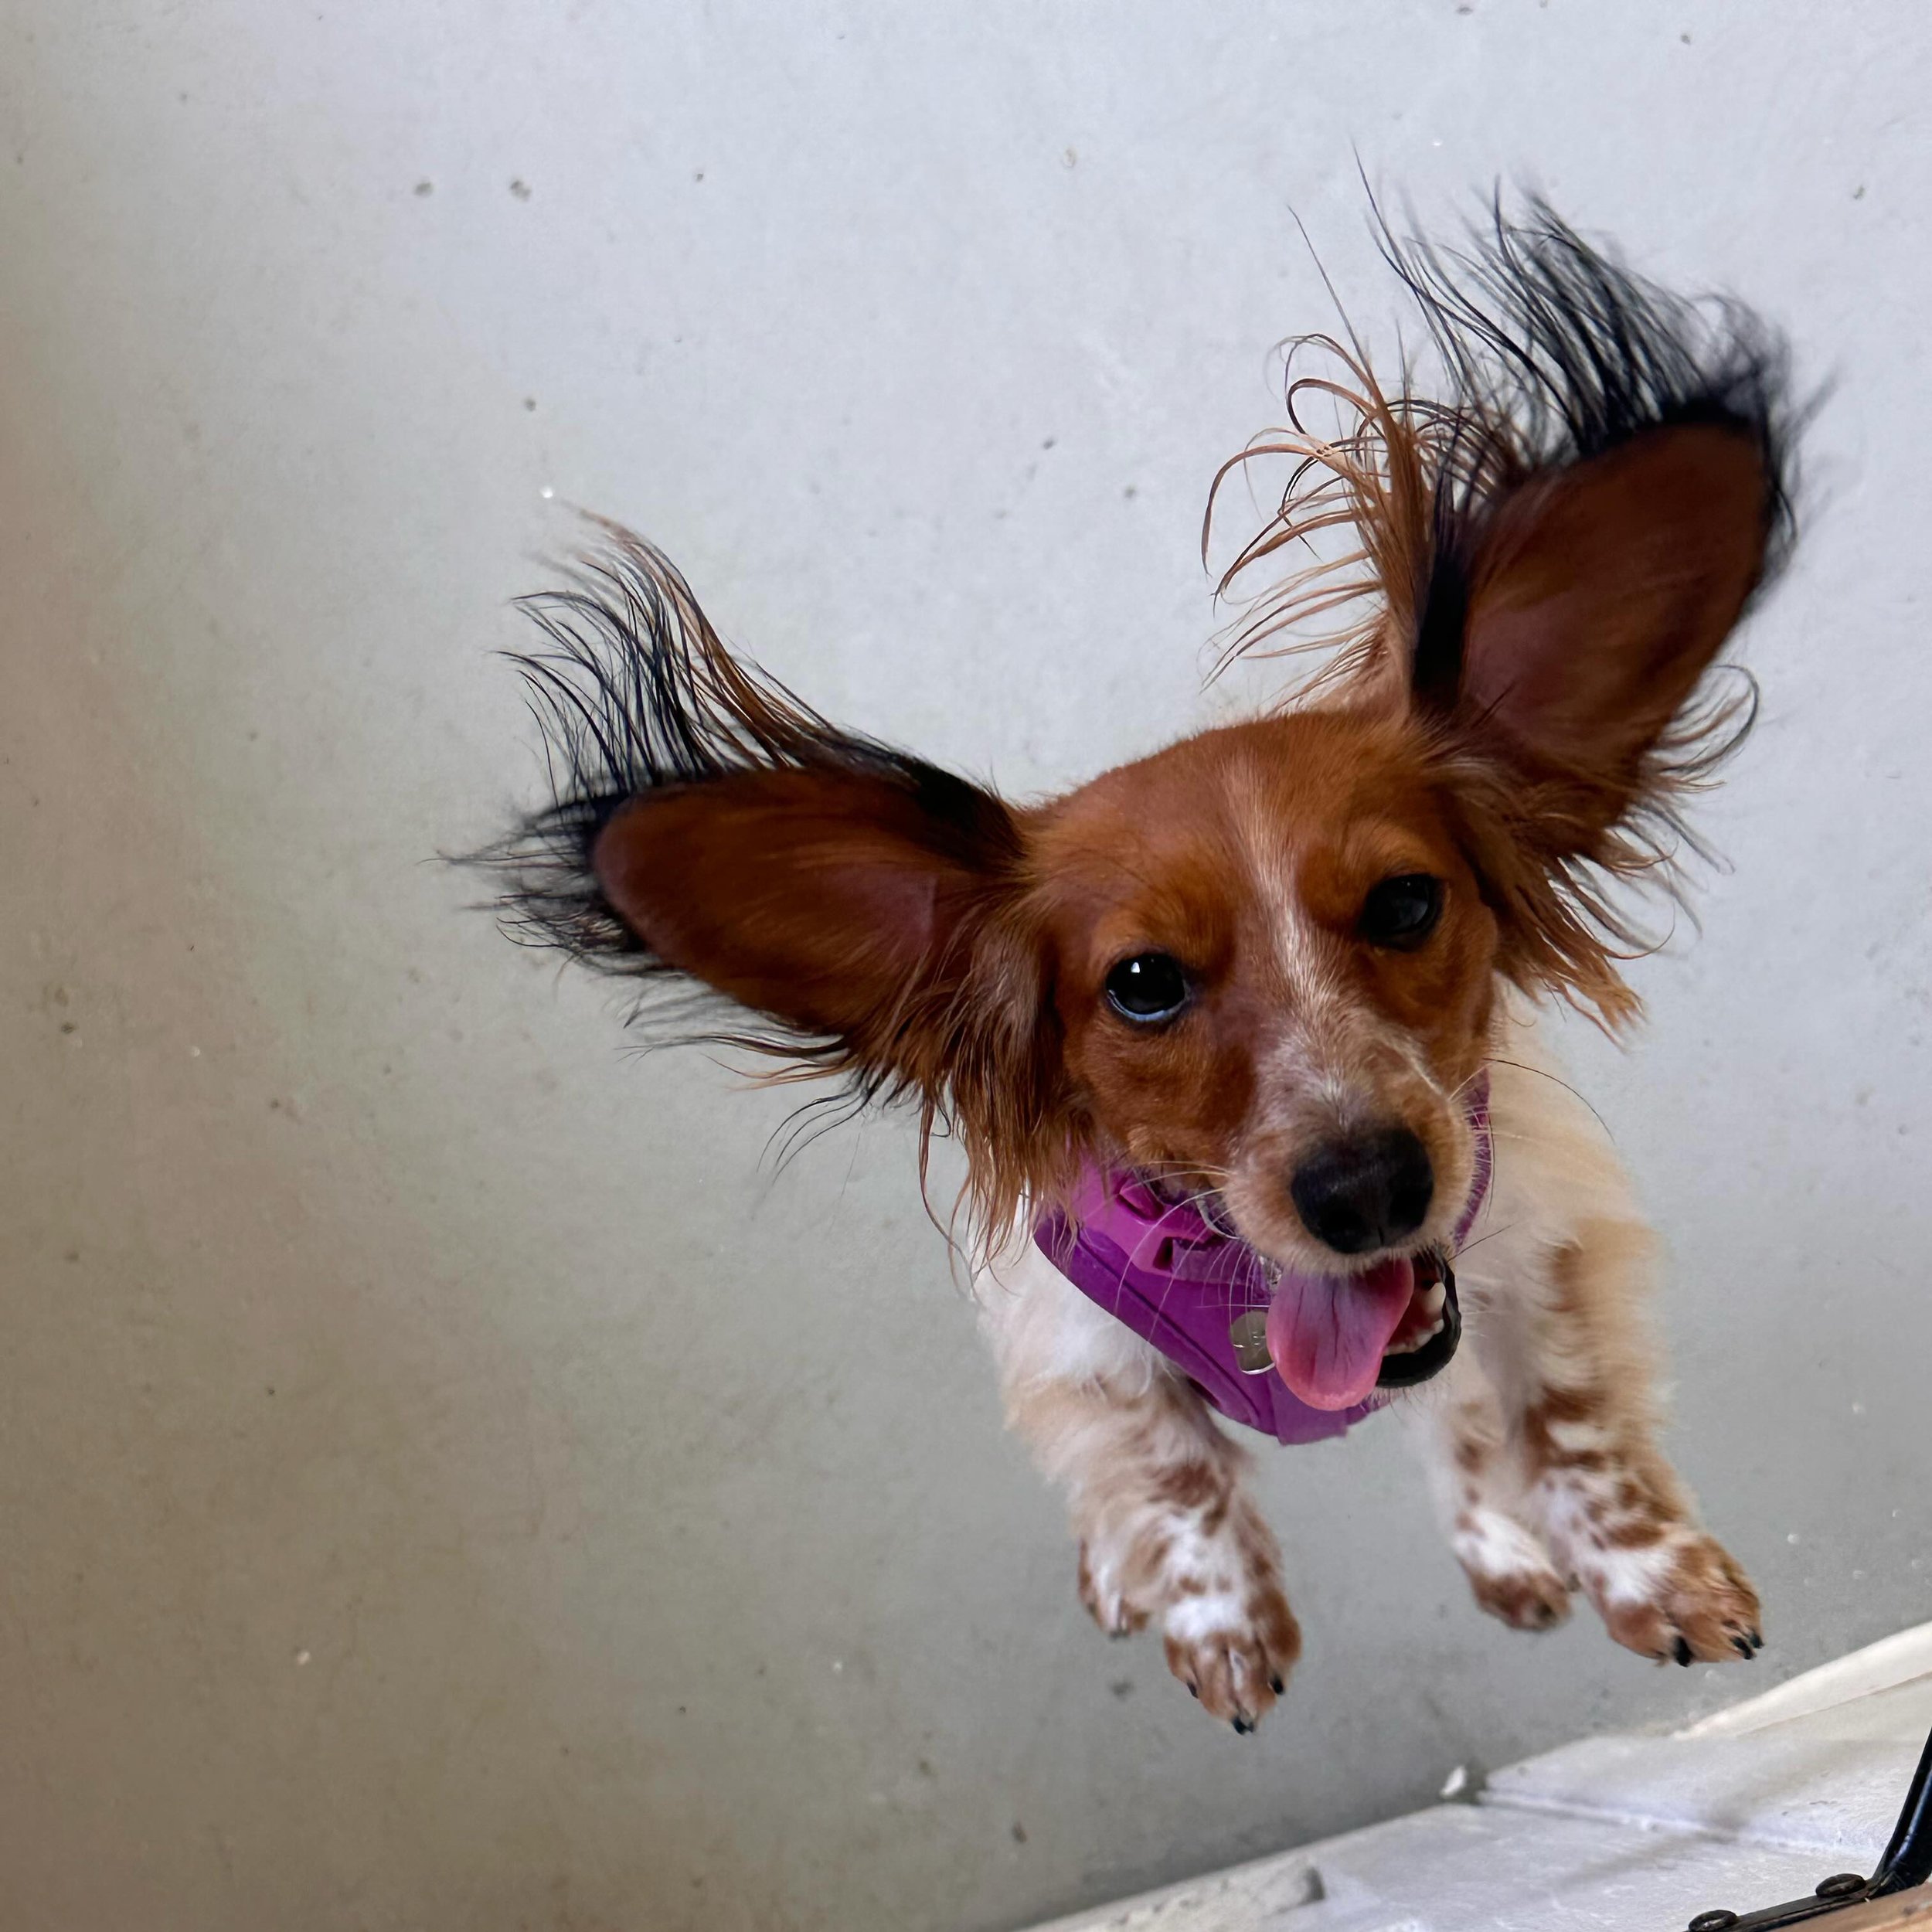 Summer grooms are getting harder to come by, book today to ensure your dog gets the warm weather cut they need! 
🌞 
Current wait times are 4-6 weeks for available appointments, but don&rsquo;t fret - we do have a cancellation list to suit you last m